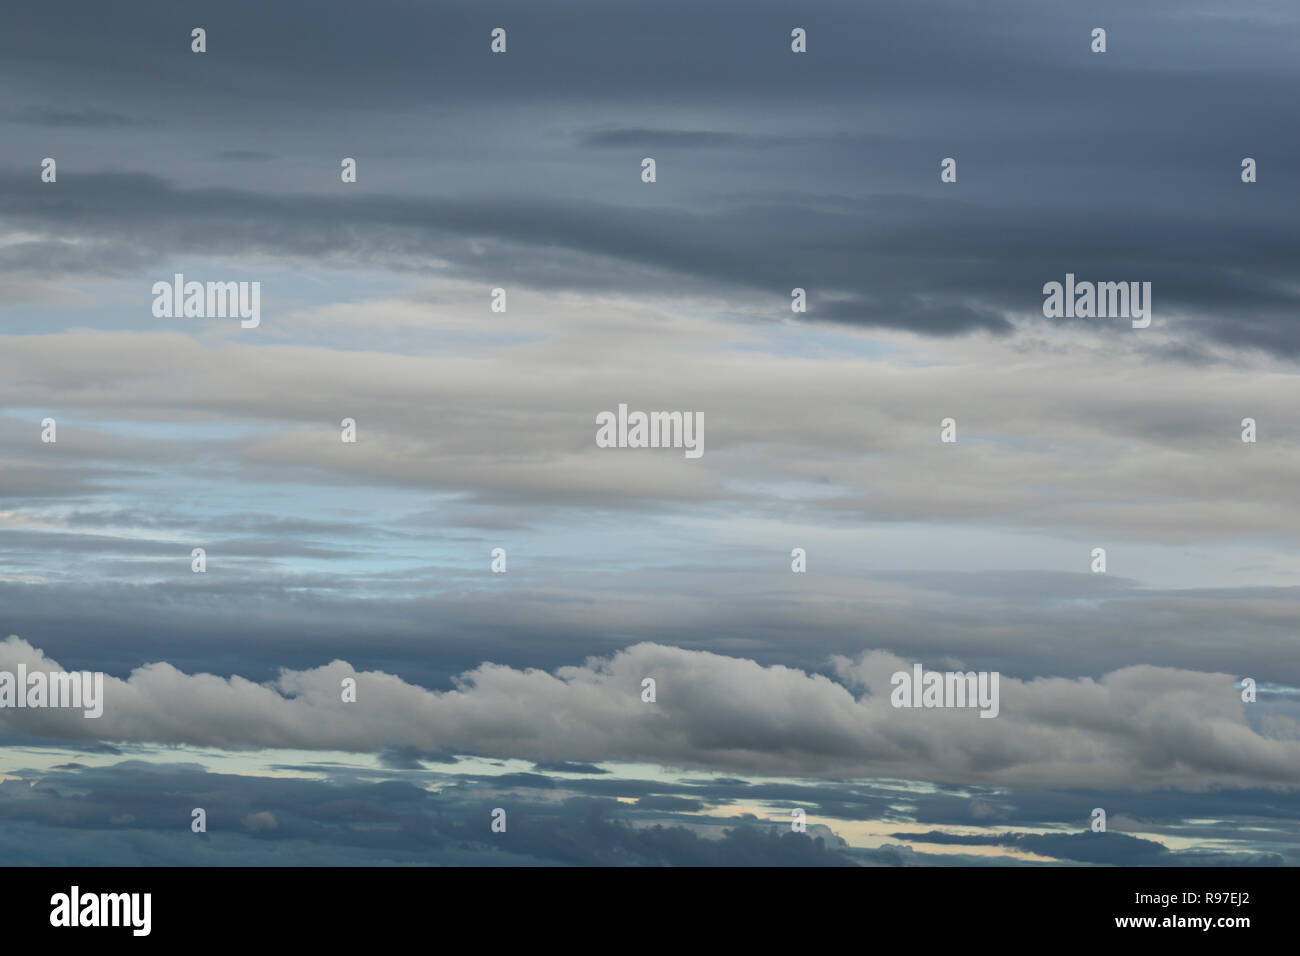 Background with grey and white clouds in the sky Stock Photo